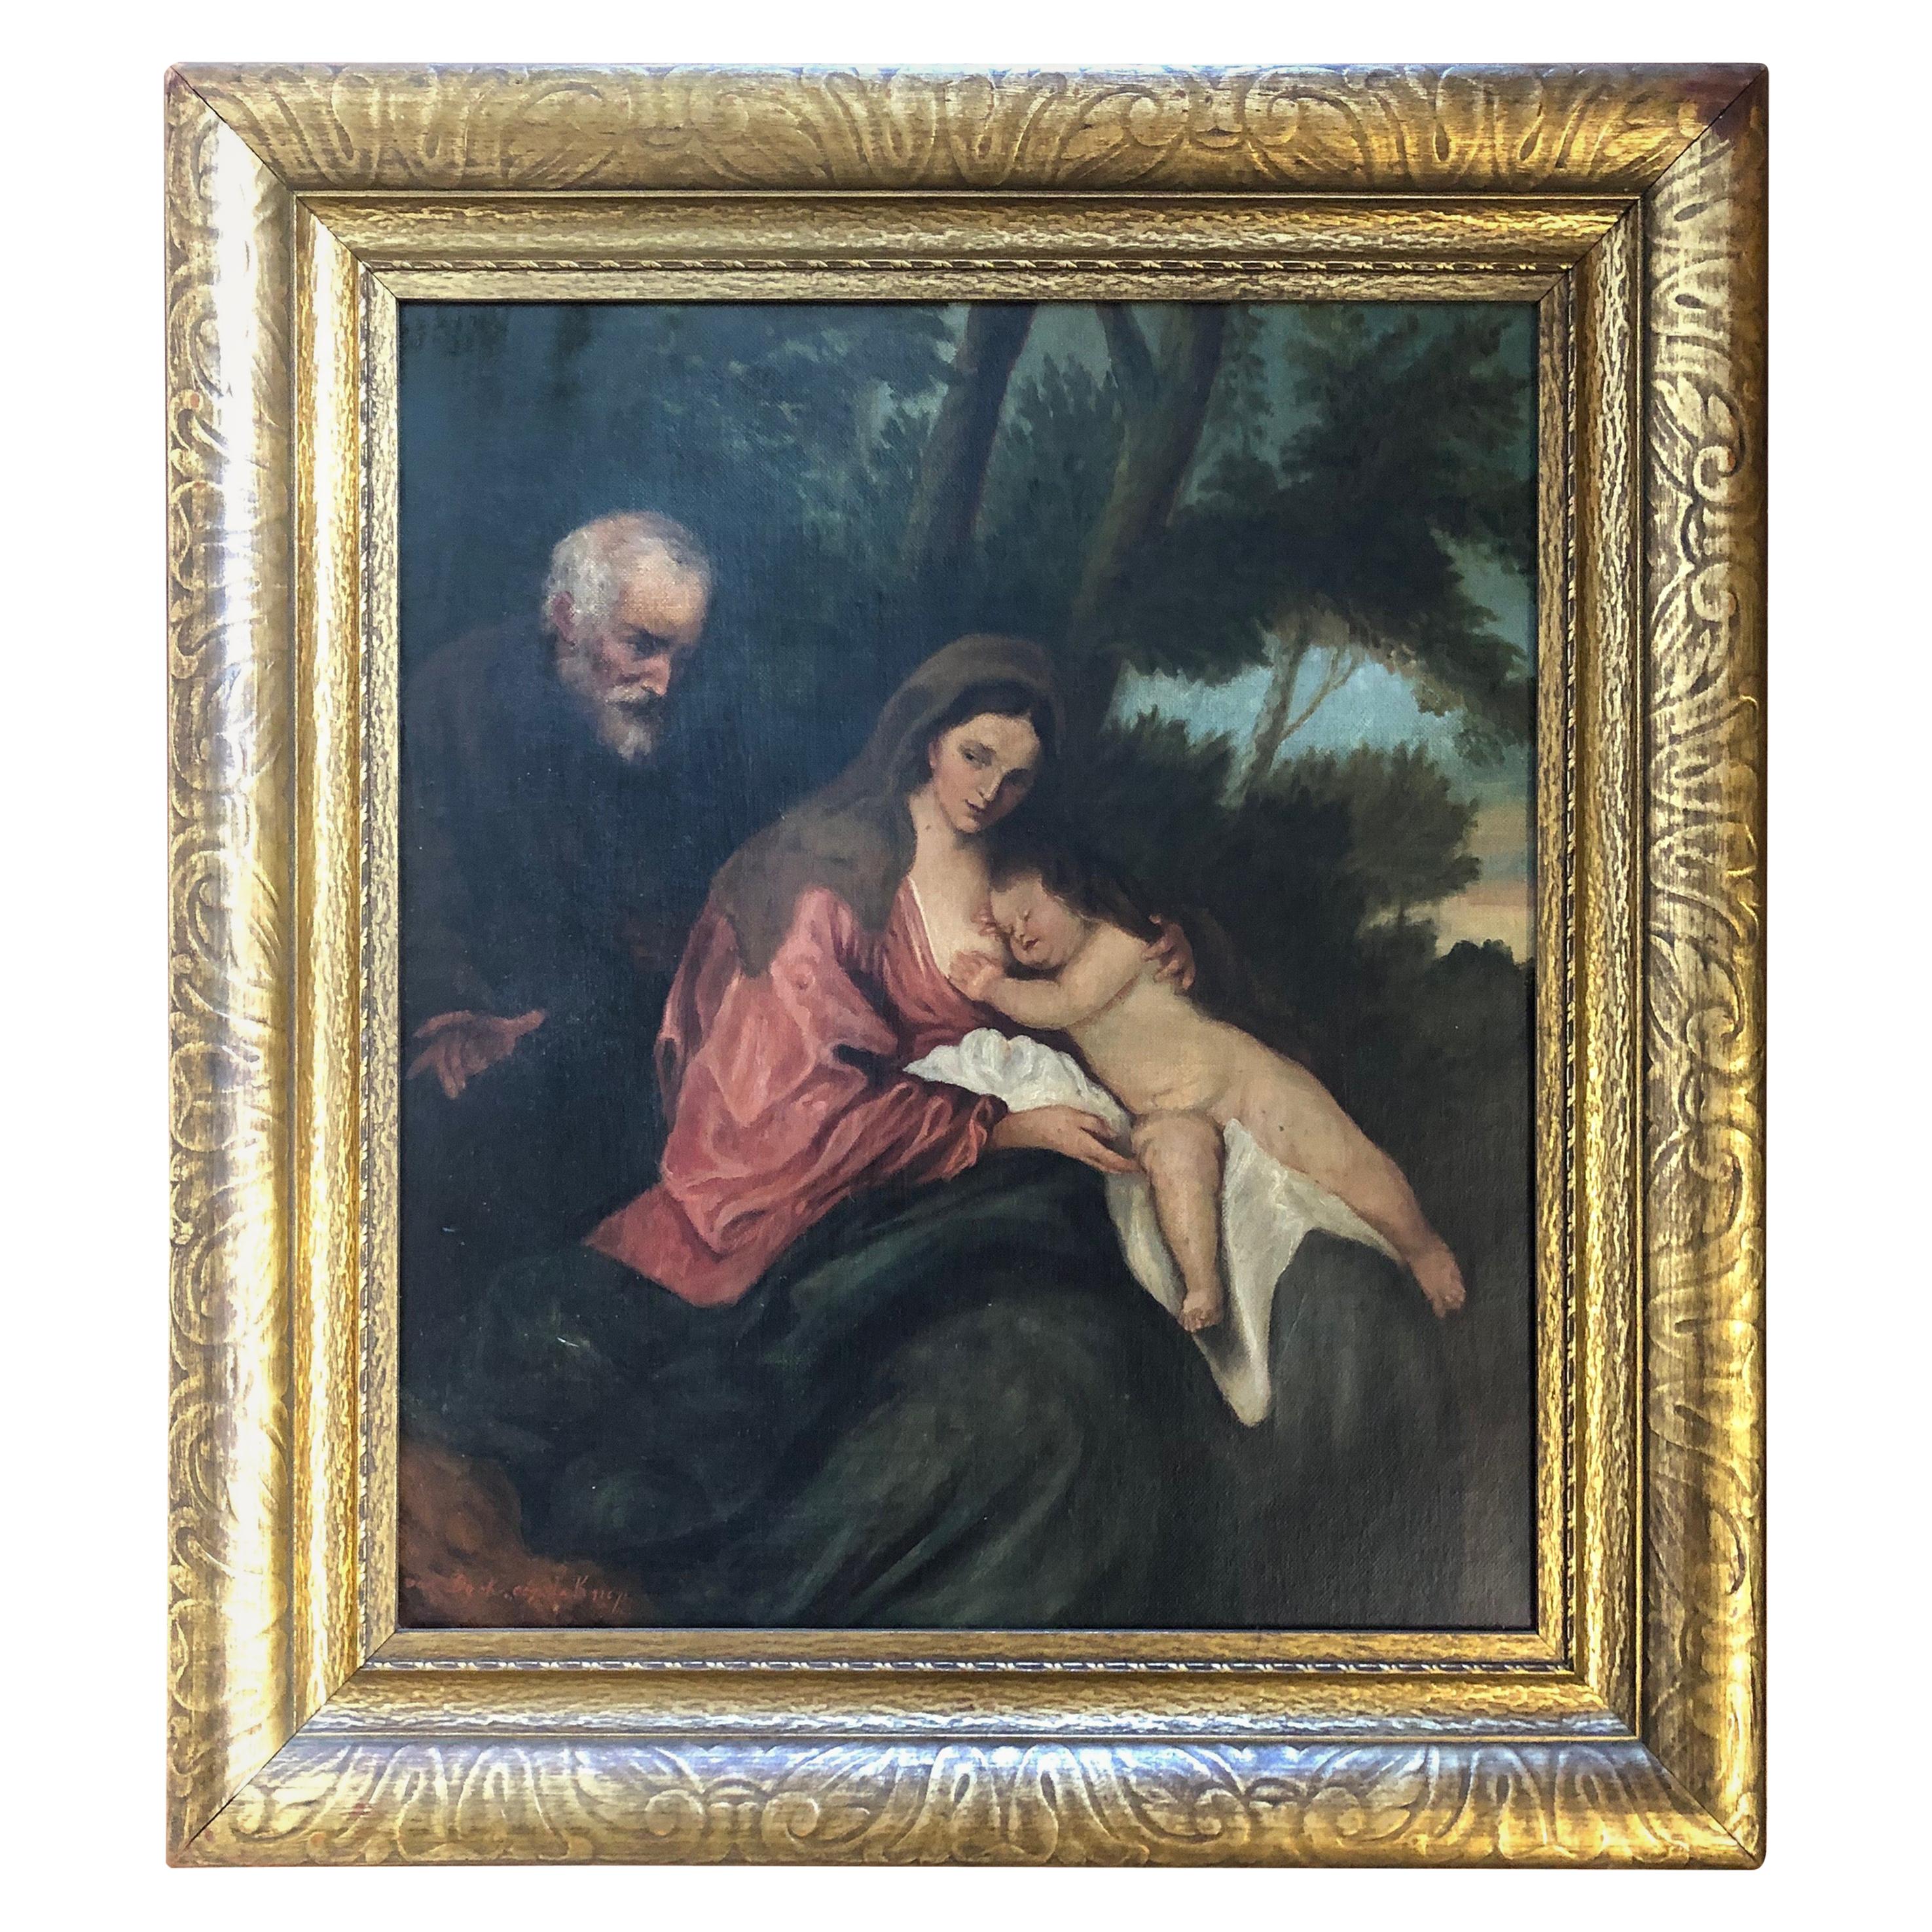 18th-19th Century Old Master "The Holy Family" After Anthonius van Dyck